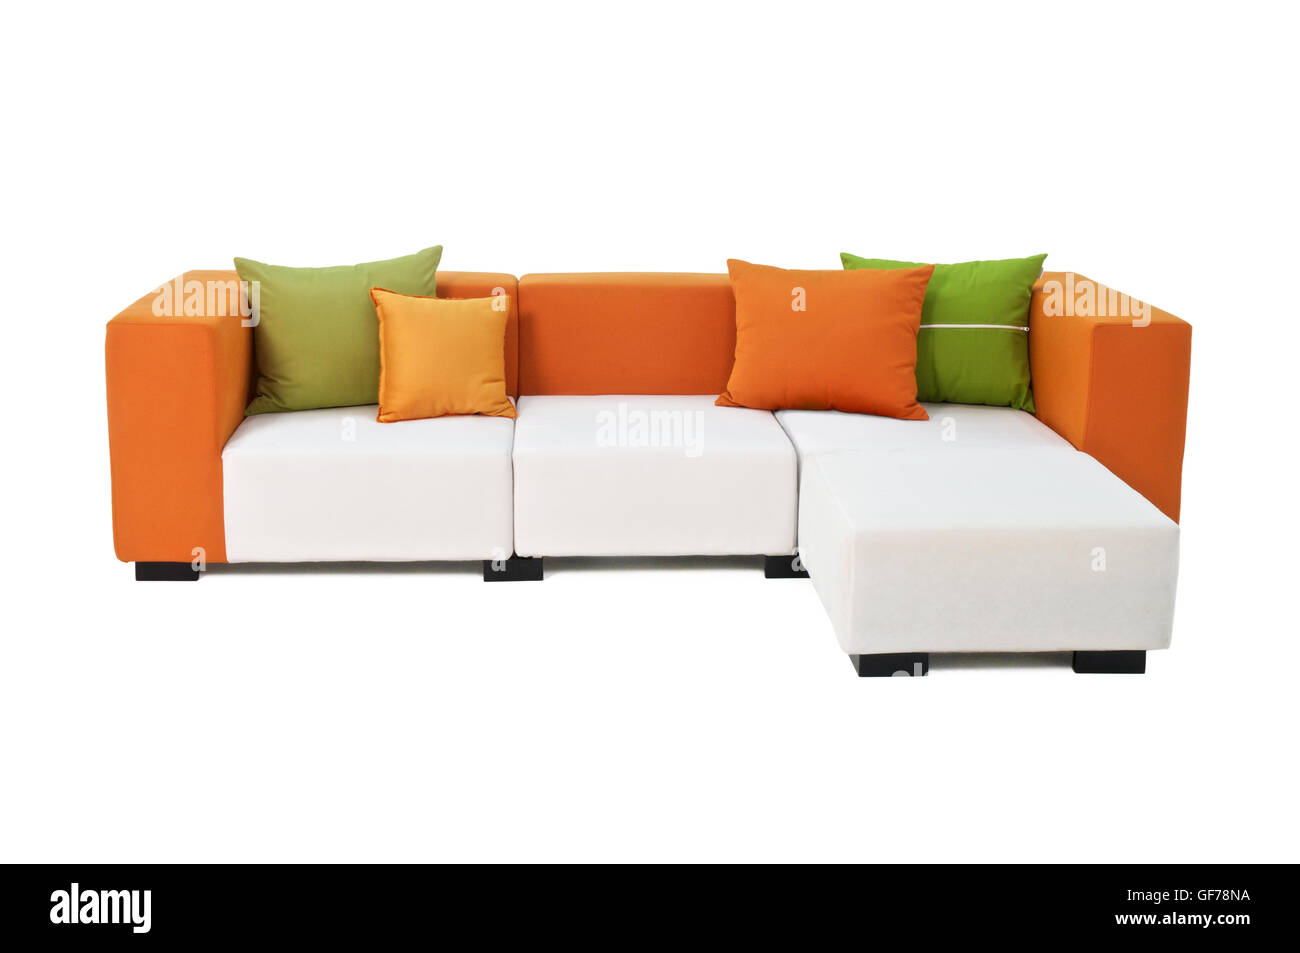 Outdoor indoor sofa with water resistant  orange and green pillows, comfortable corner set furniture Stock Photo